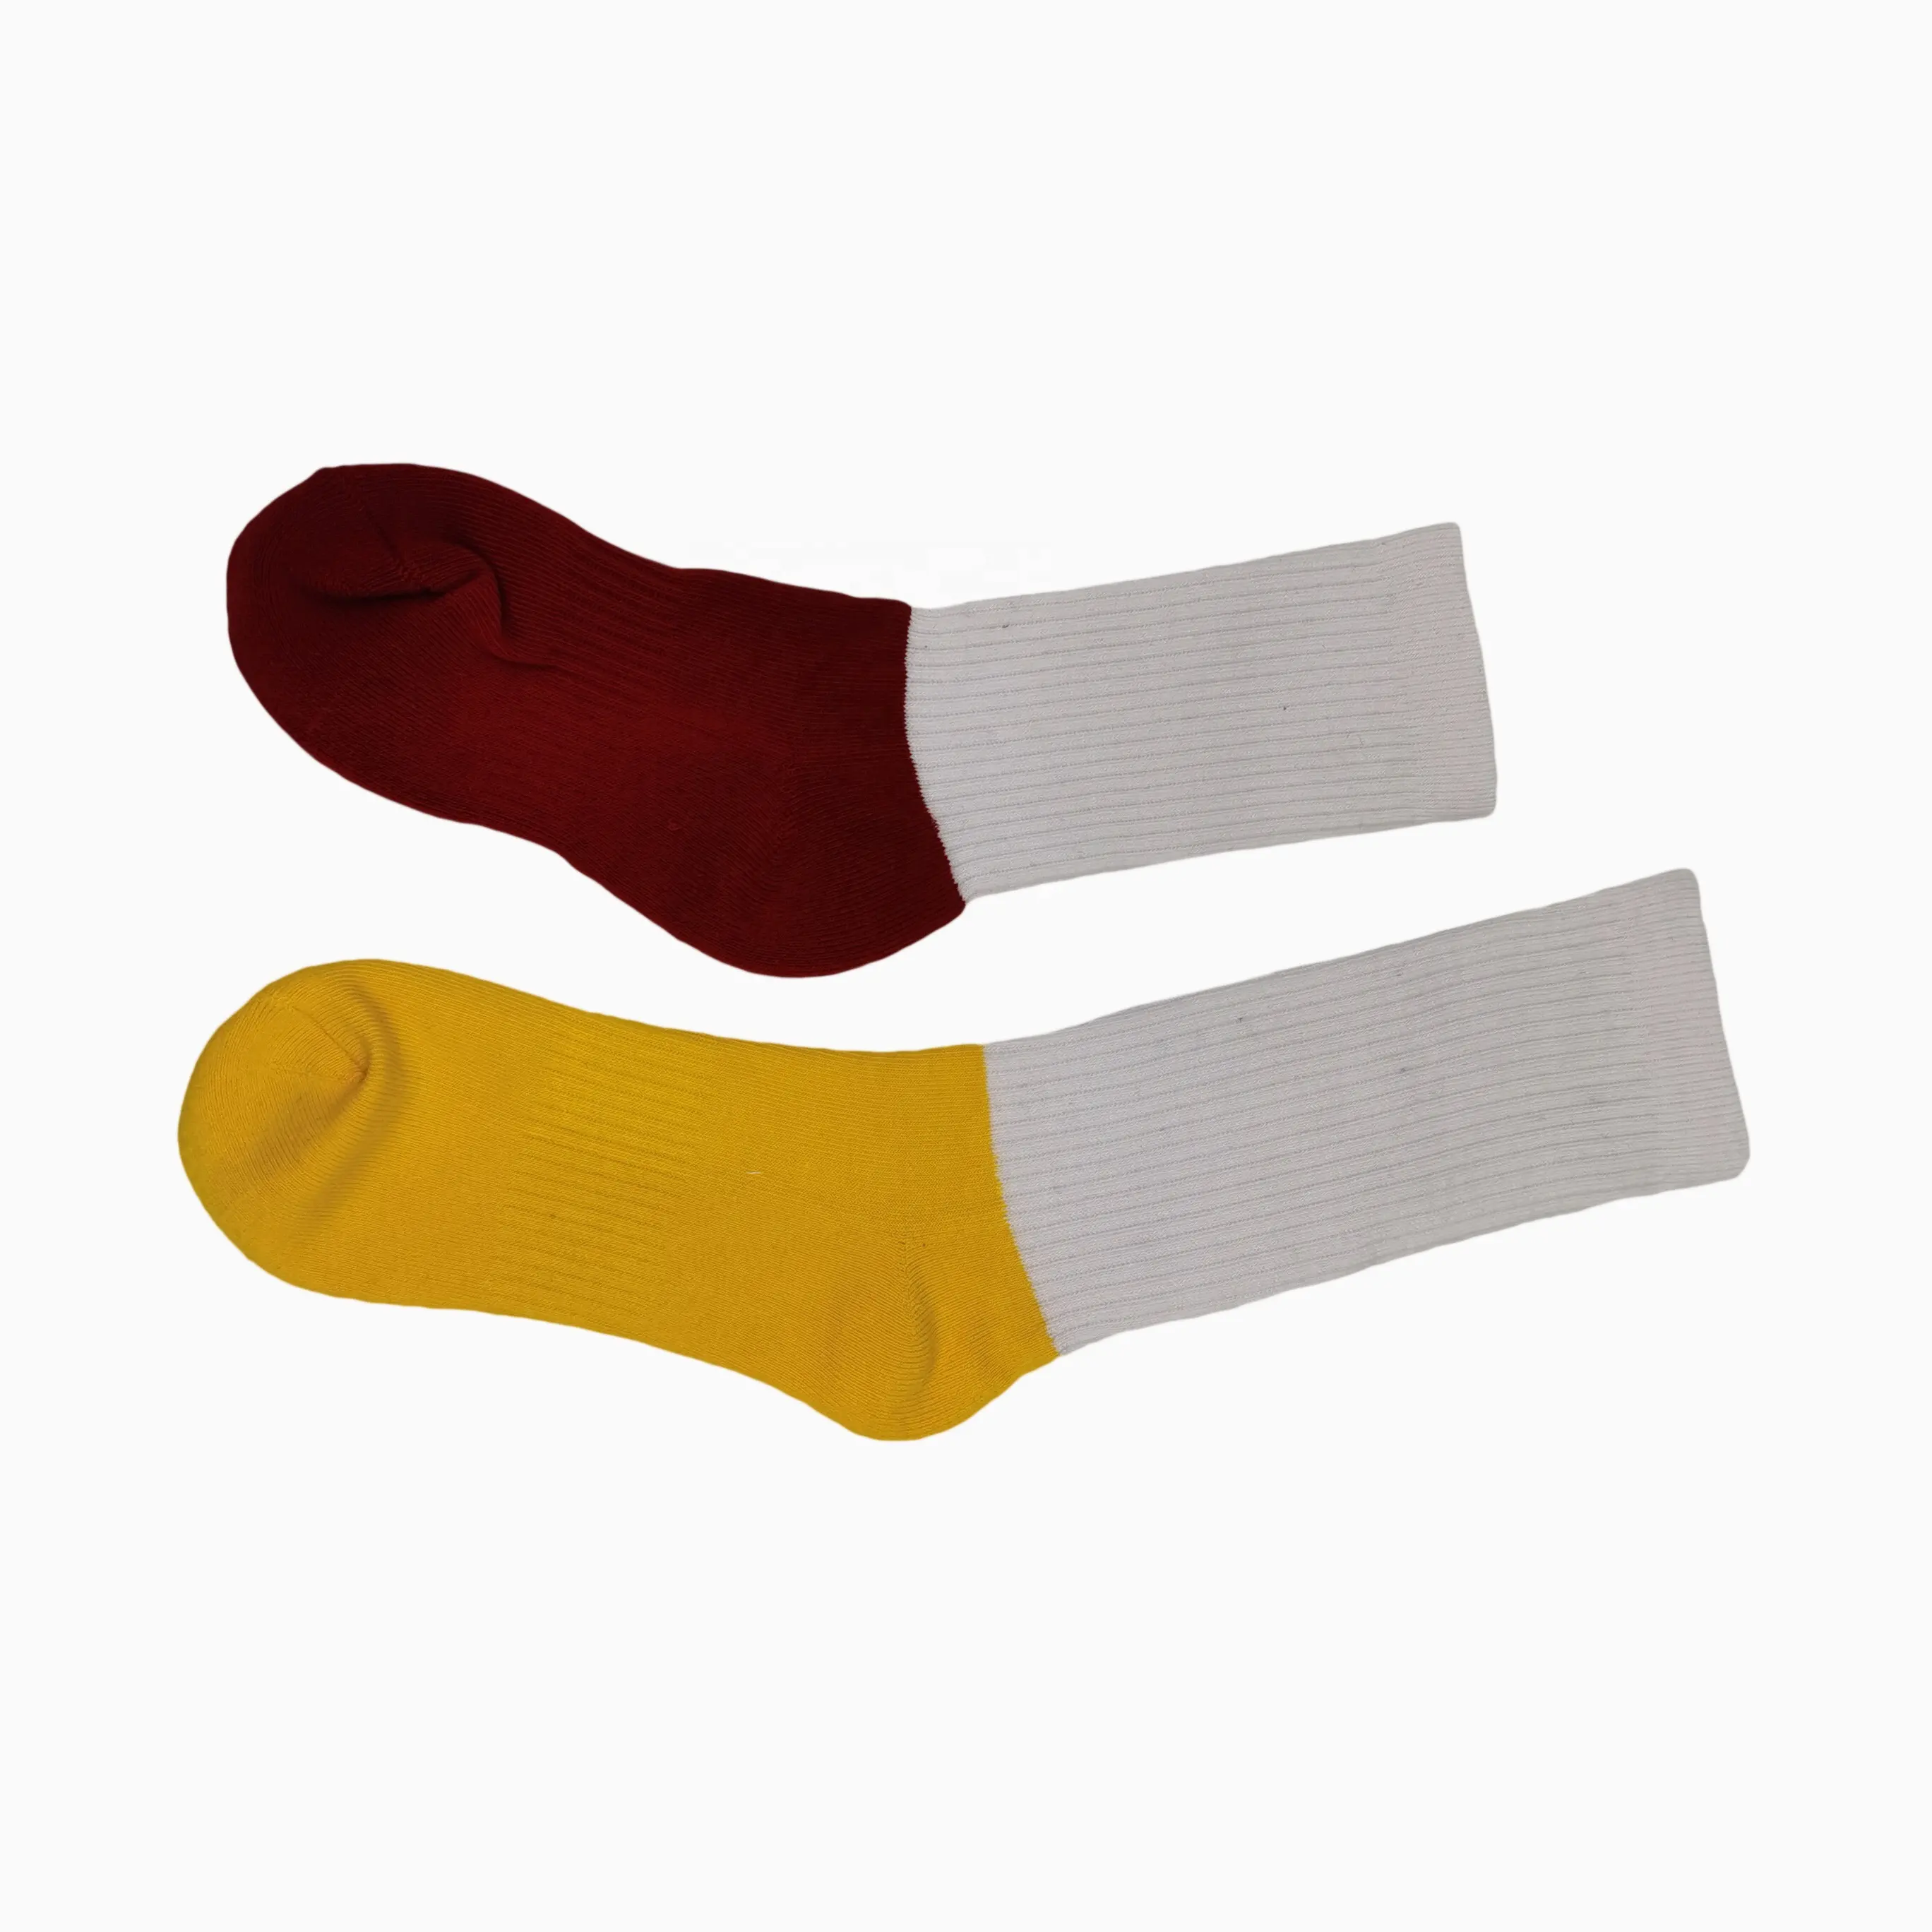 New Fashion cotton knitted sport socks thick terry sole blank digital printed socks sublimation socks blank two colors mix